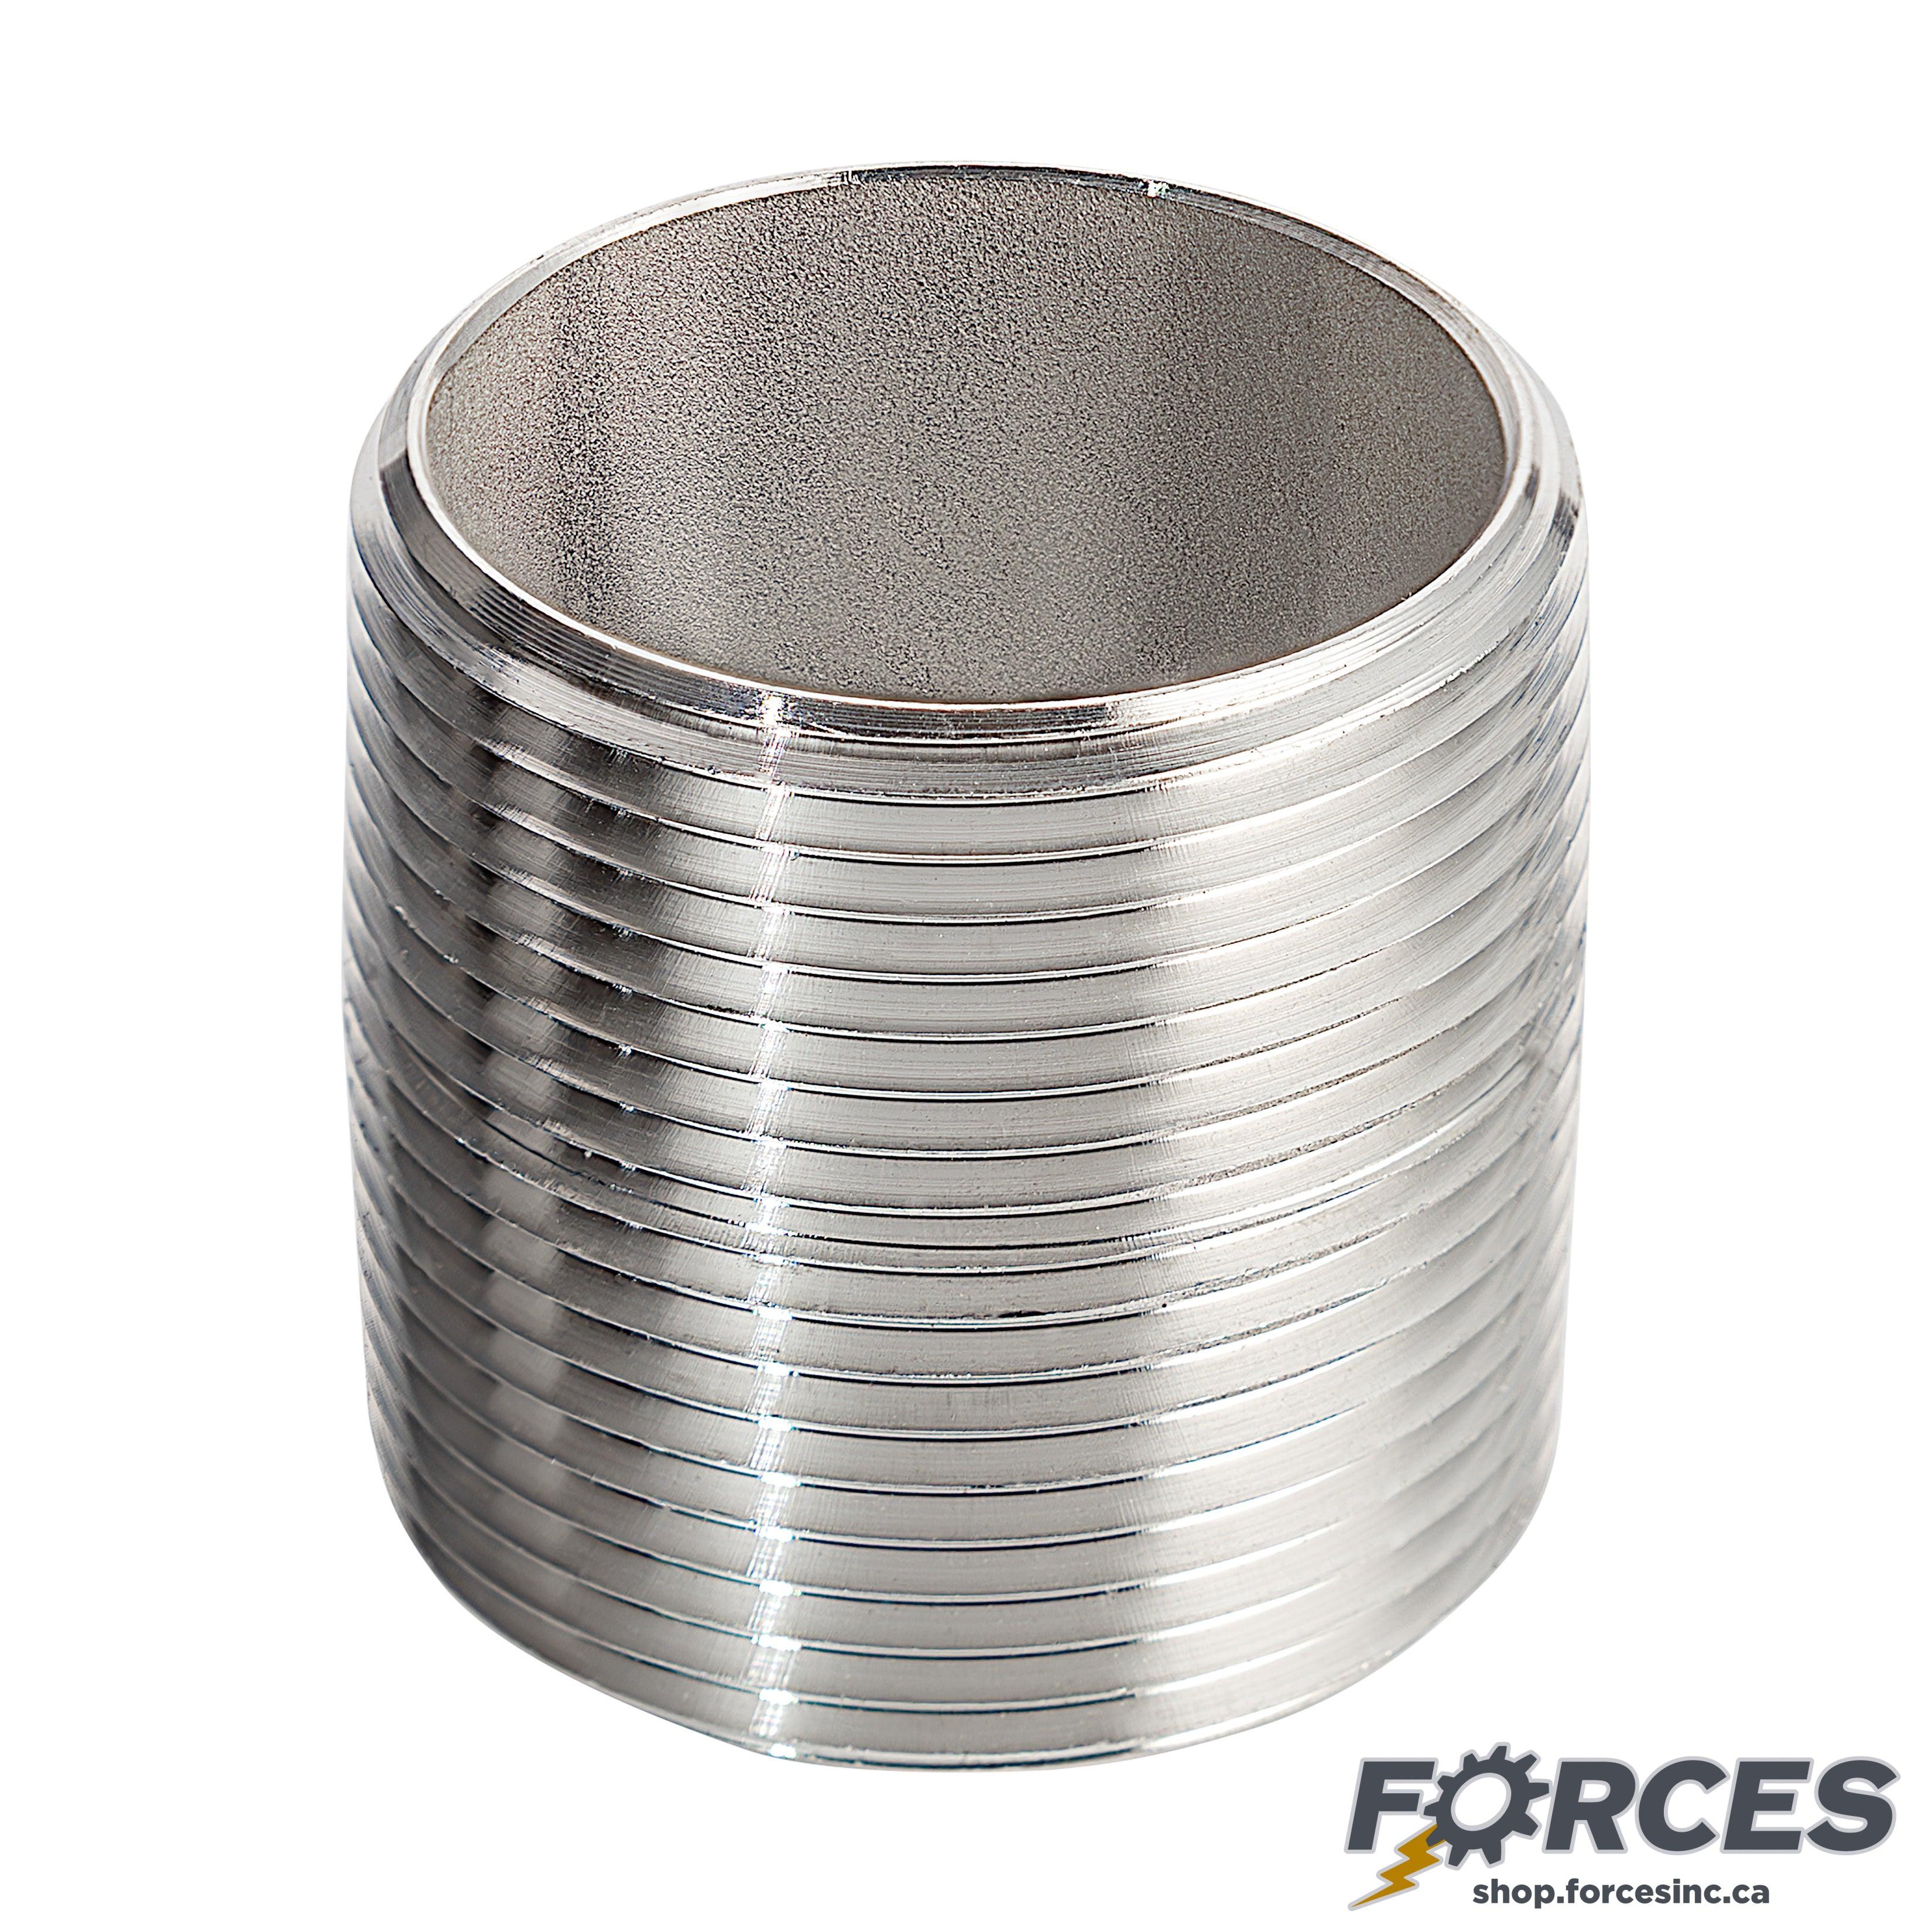 3/8" Closed Nipple - Stainless Steel 316 - Forces Inc